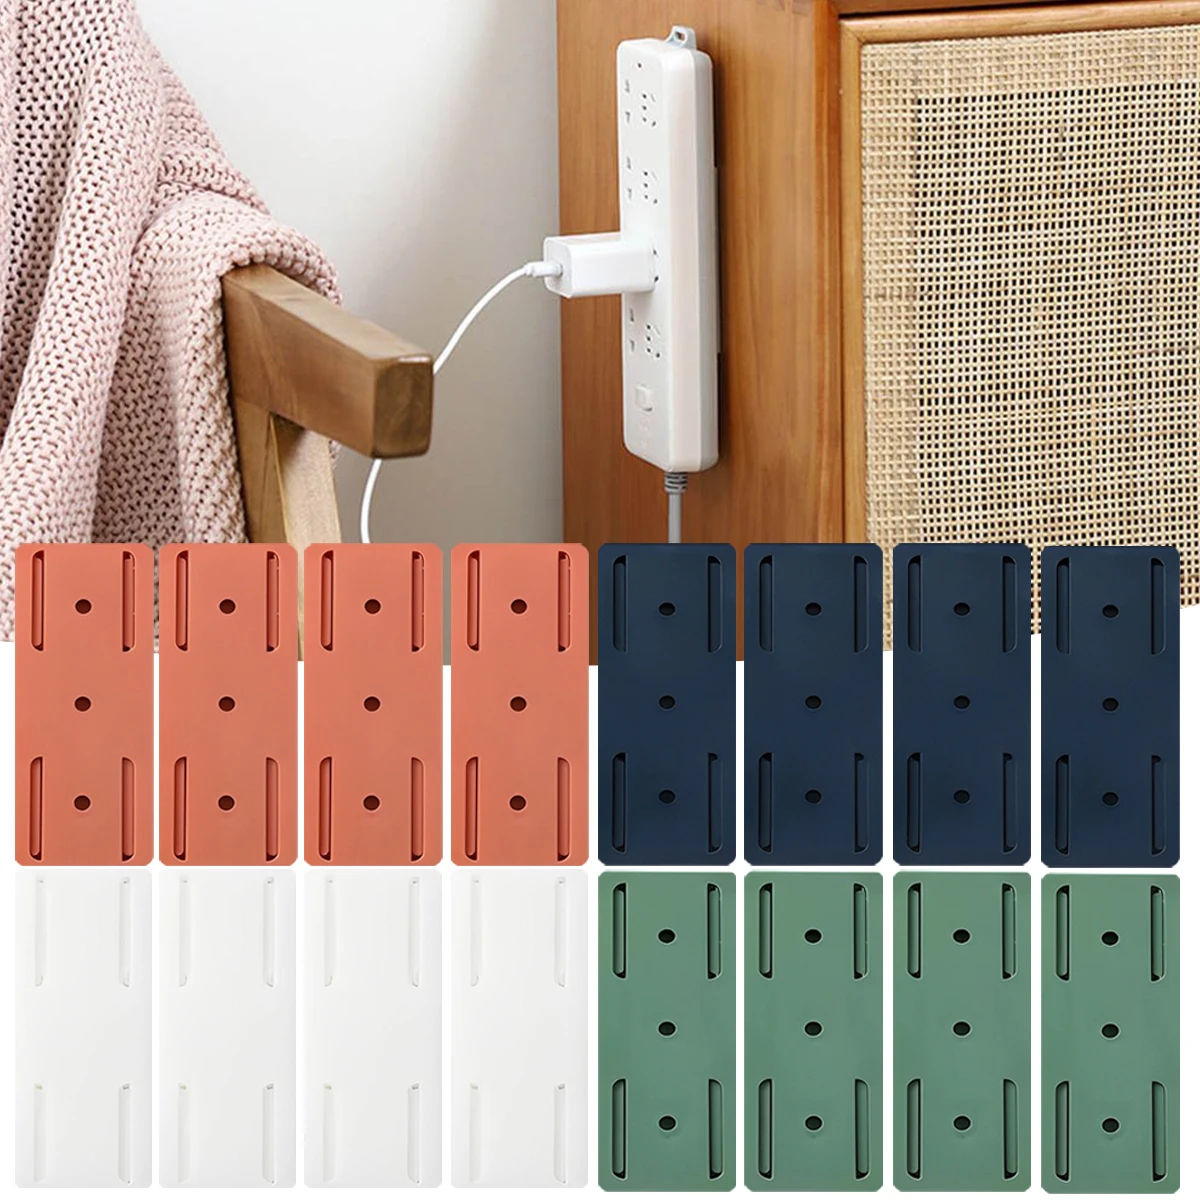 

New 16Pcs Socket Fixer Wall Mount Socket Bracket Self-Adhesive Power Strip Holder Punch Free Socket Stand for WiFi Router